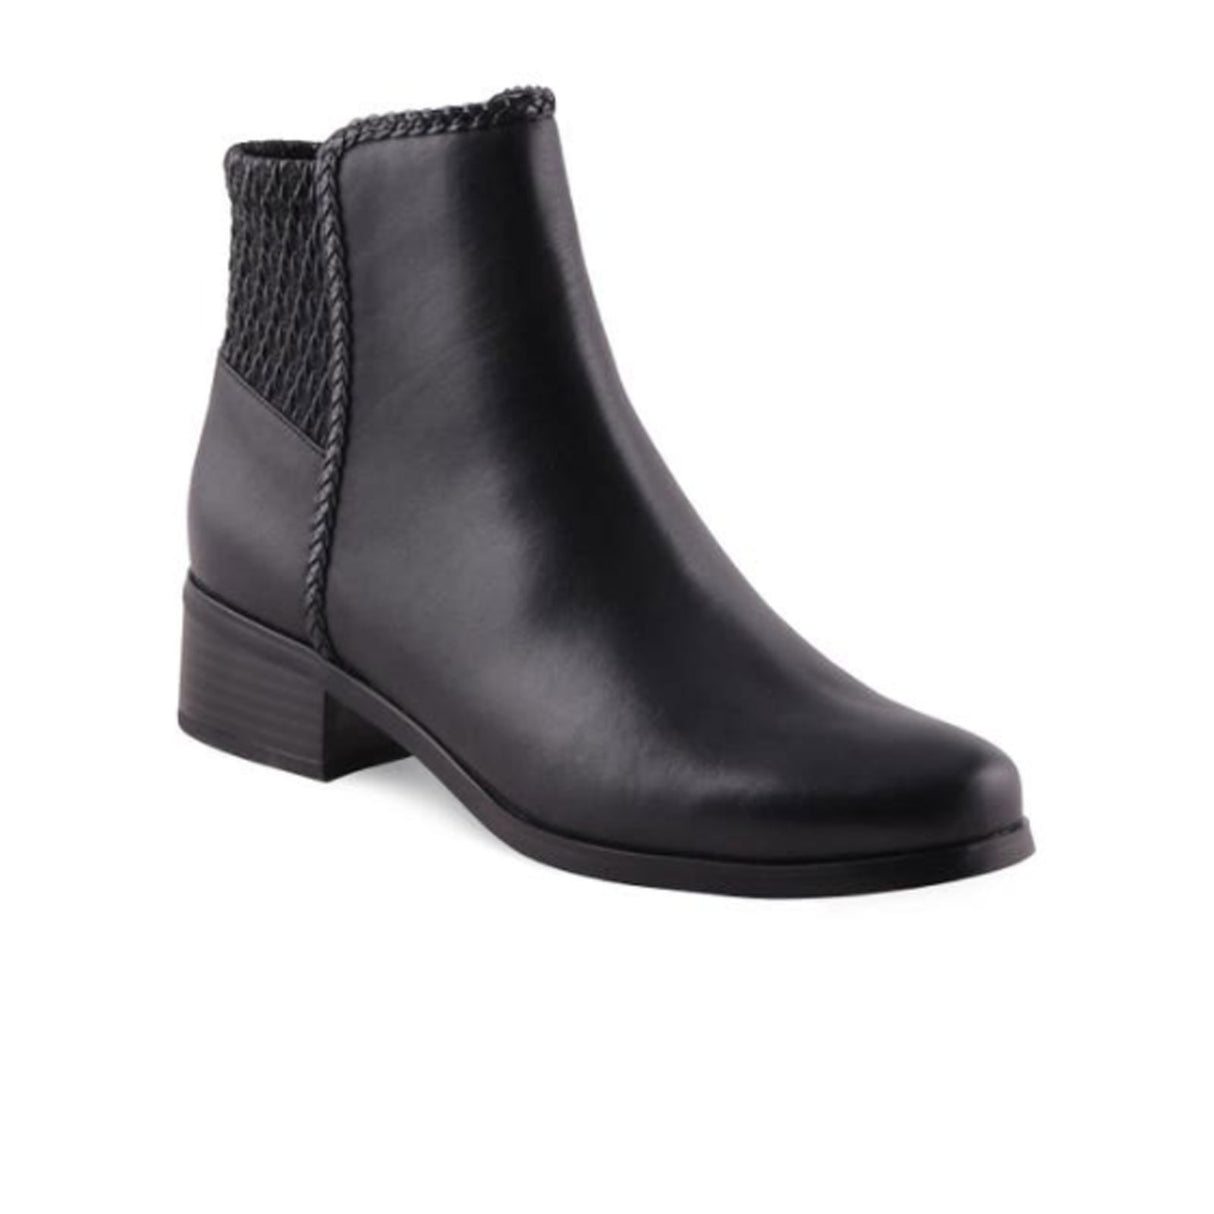 AquaDiva Kassel Ankle Boot (Women) - Black Leather Boots - Fashion - Ankle Boot - The Heel Shoe Fitters